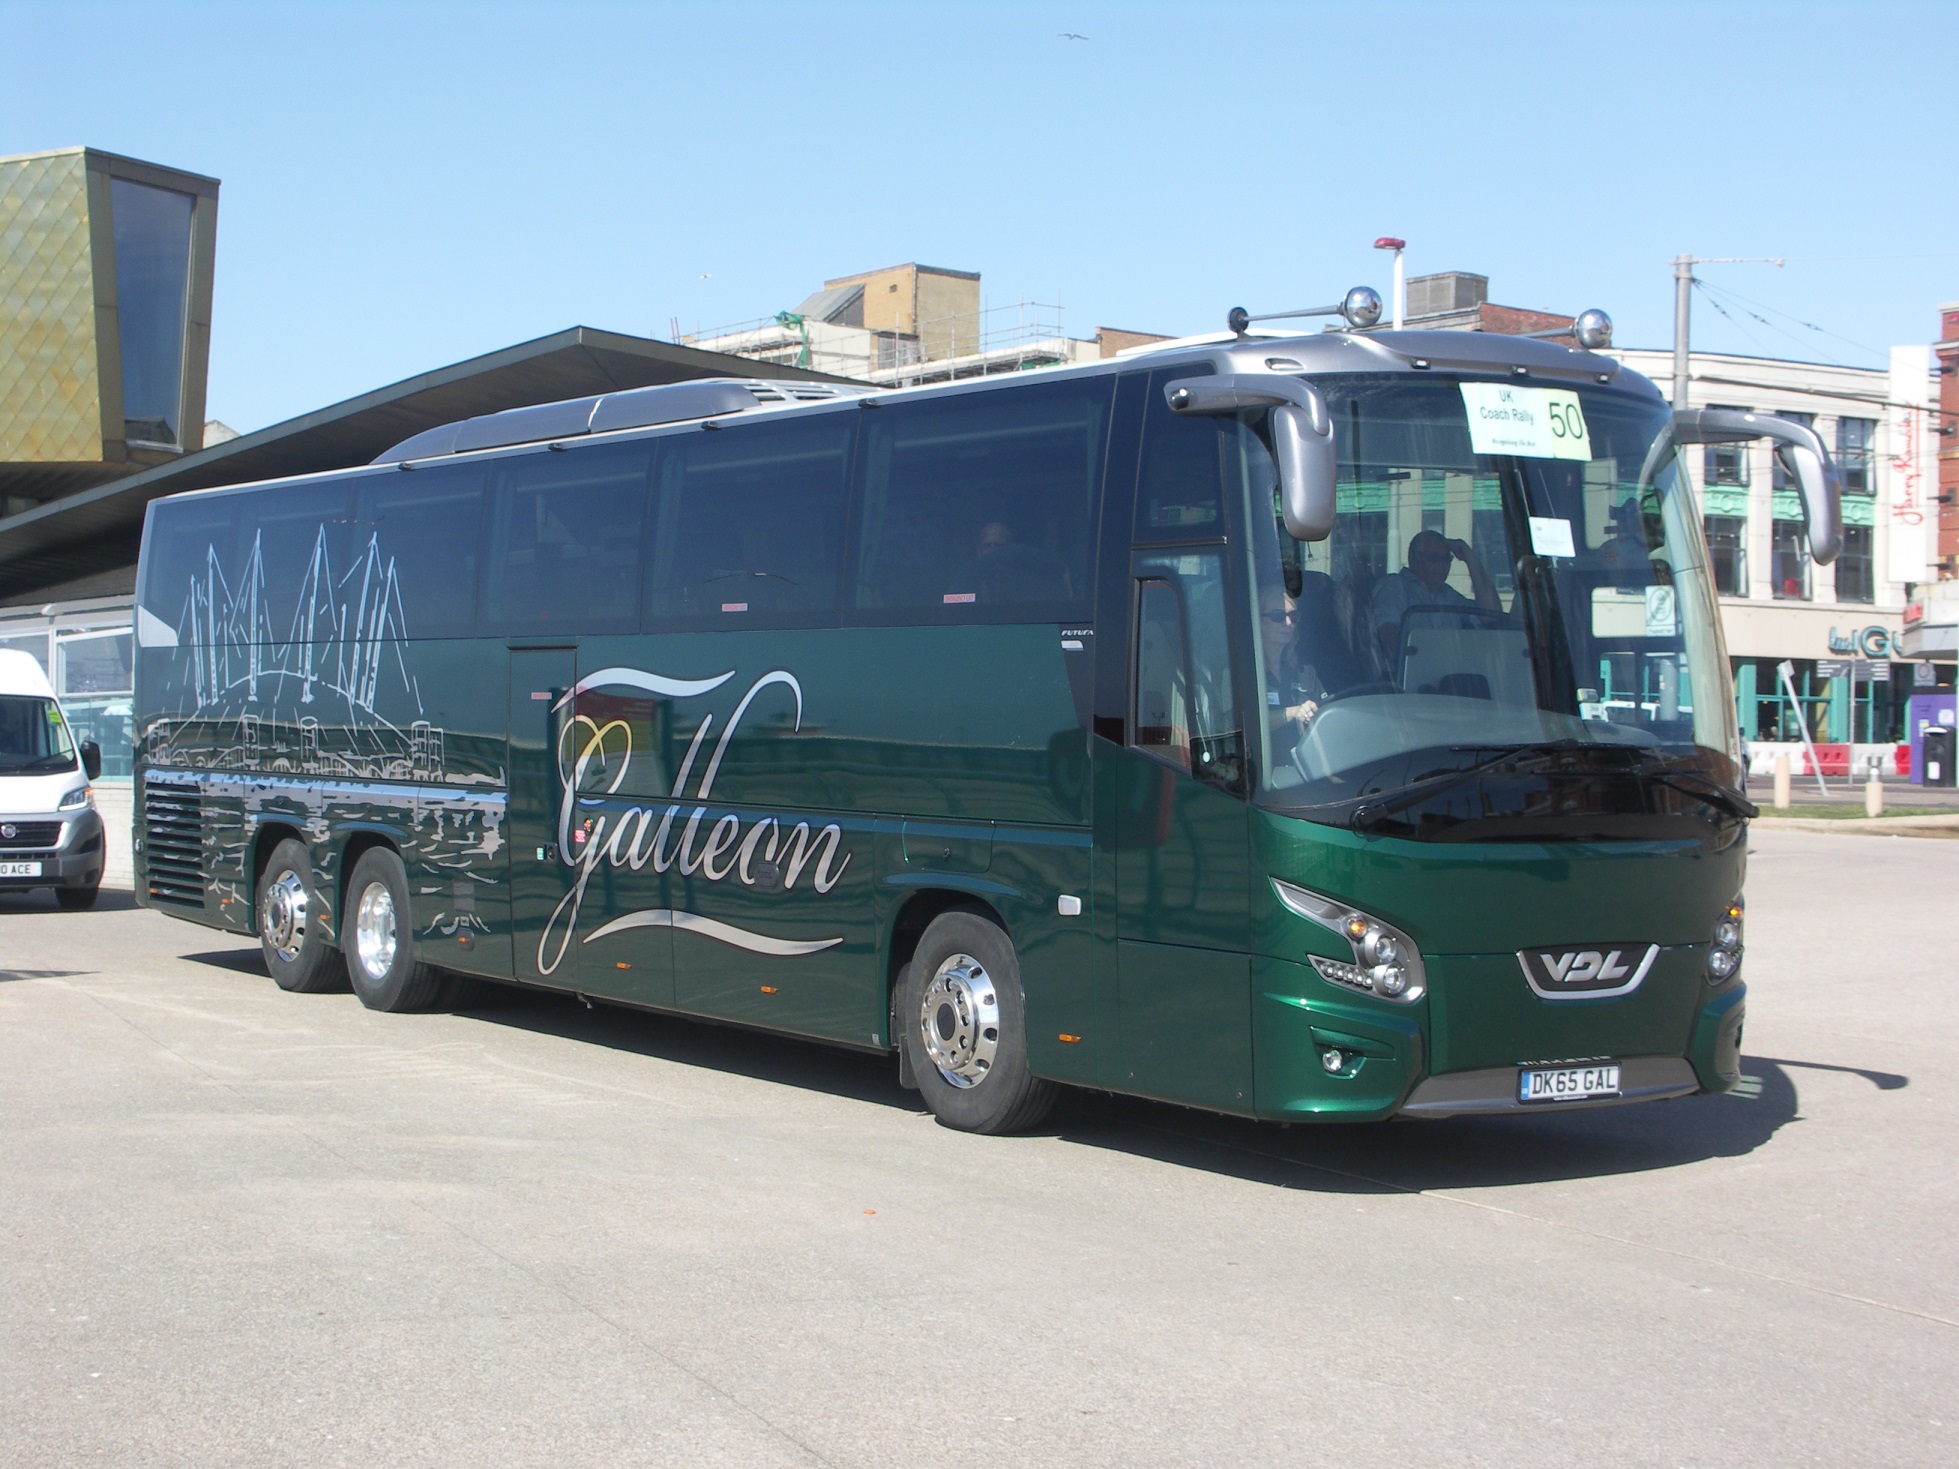 Galleon Travel purchased by Vectare